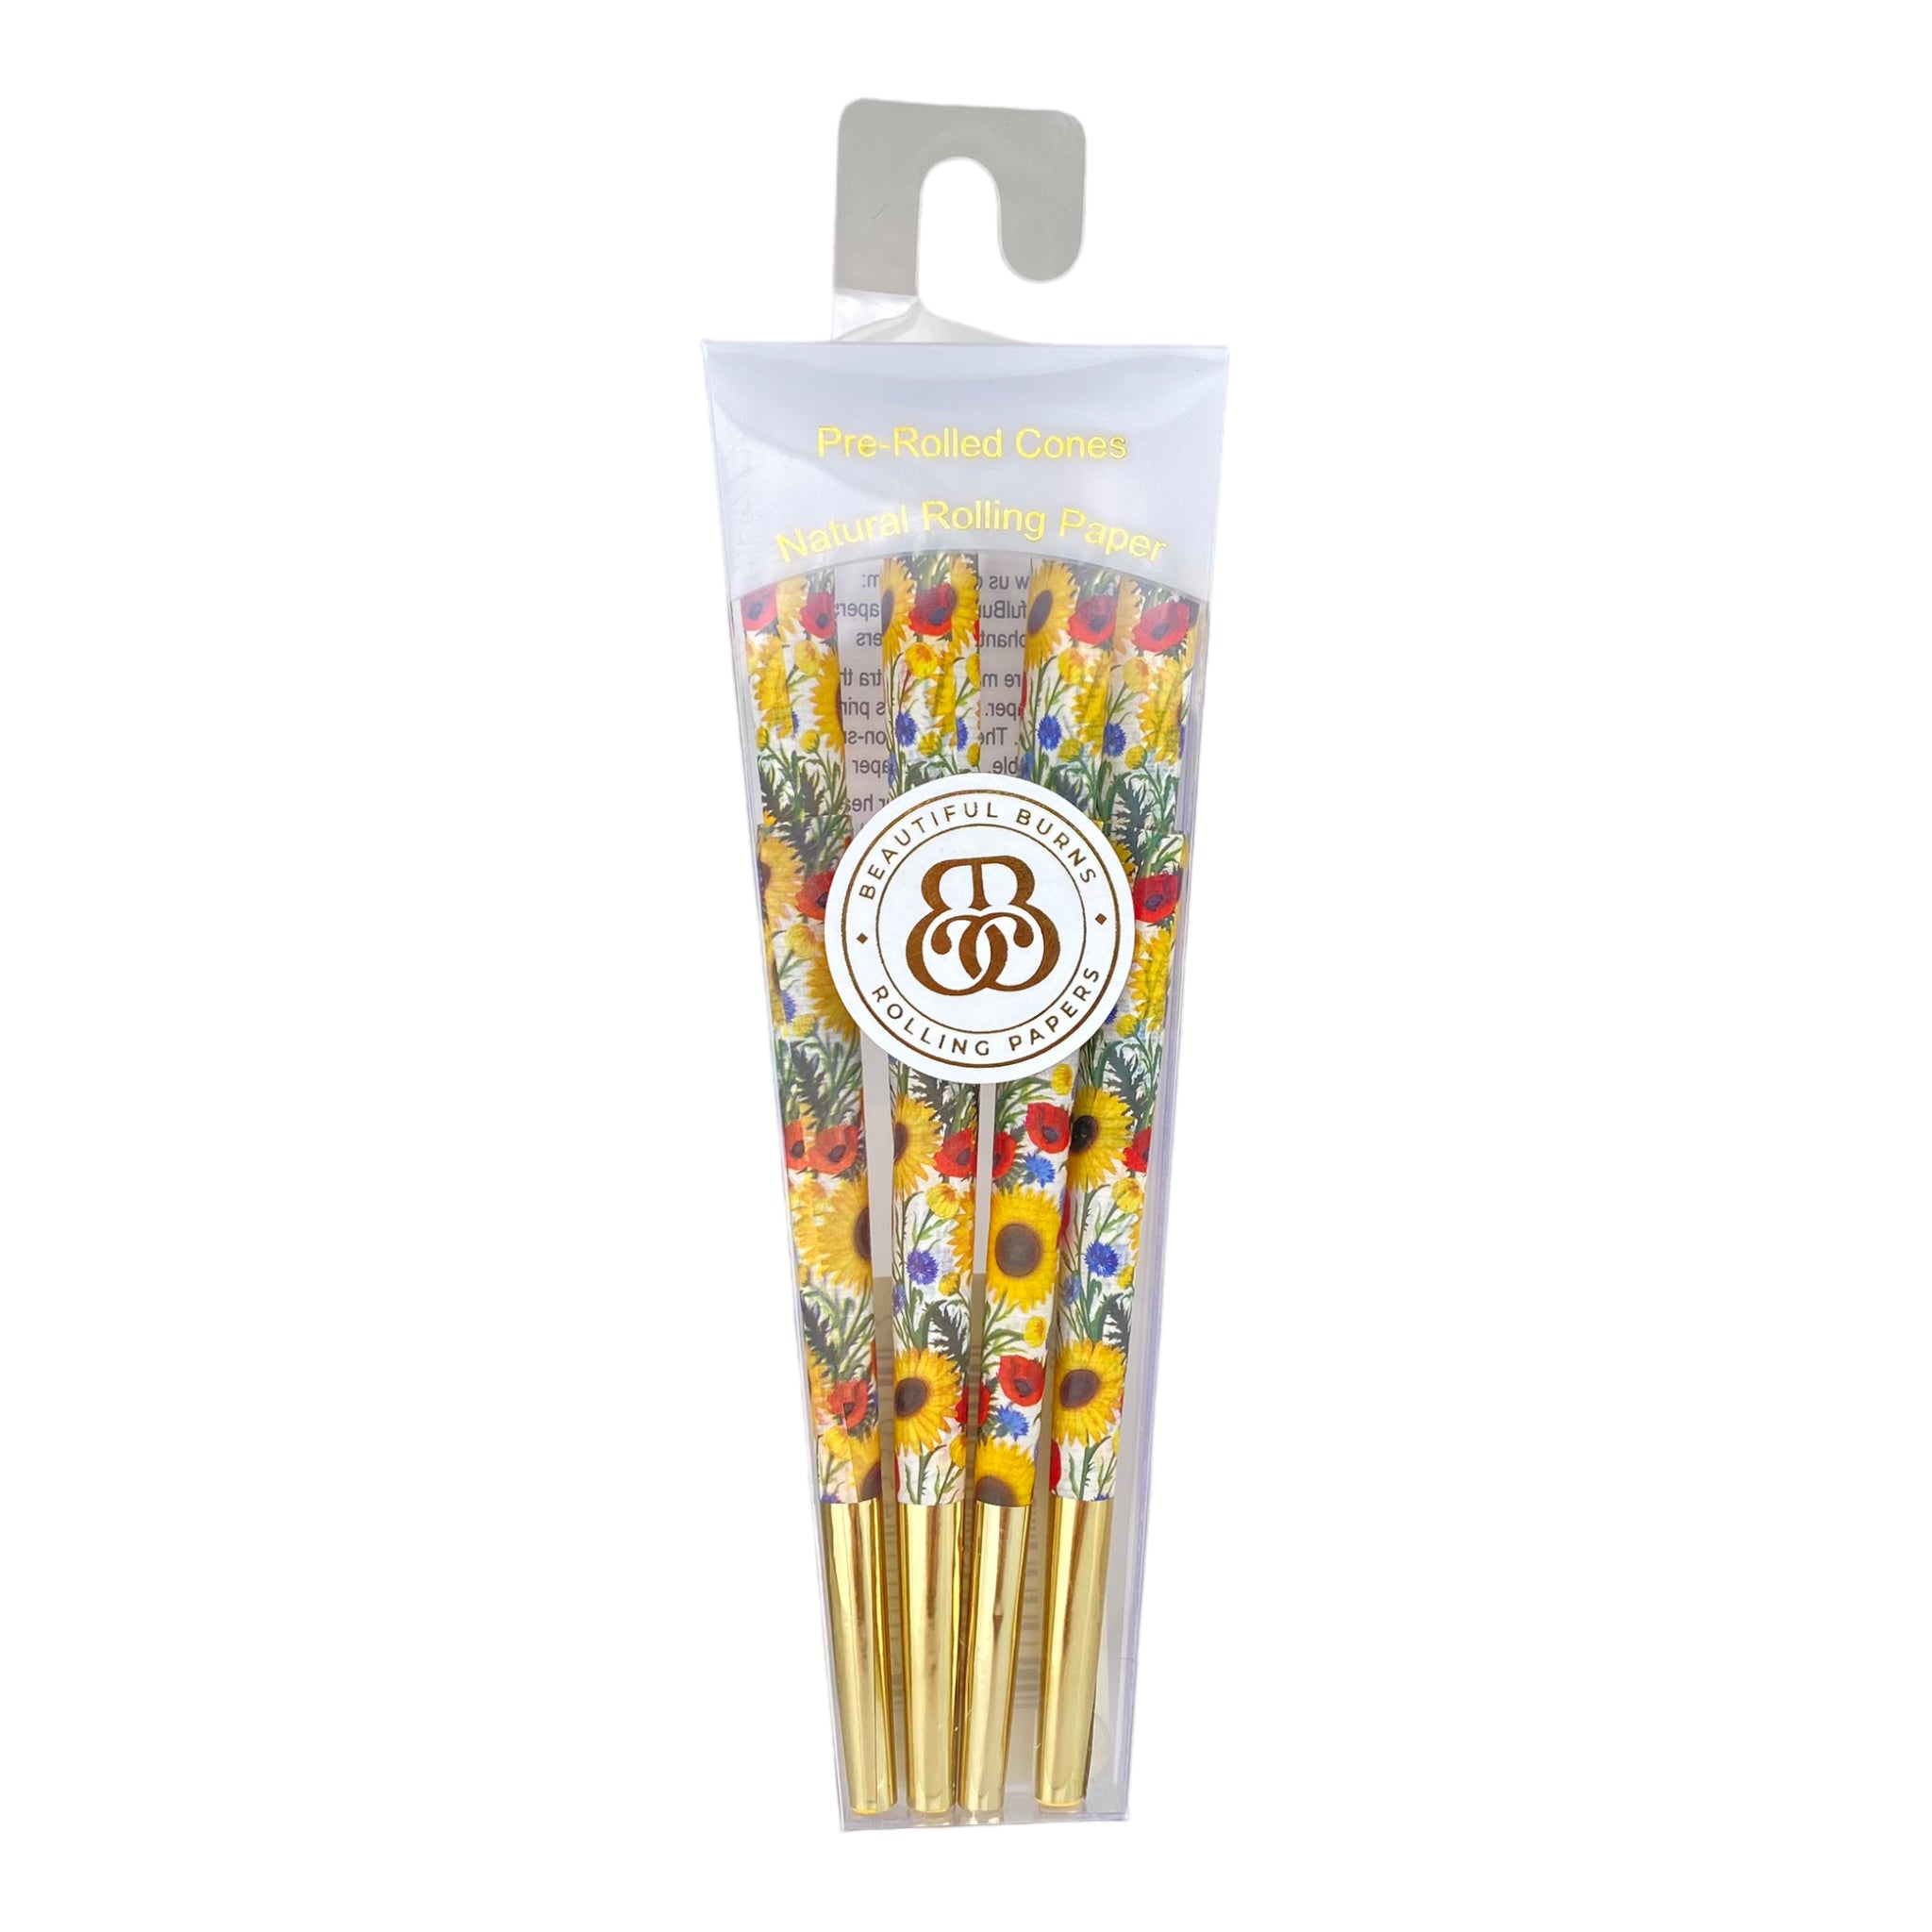 Are Hemp Wicks Good For Candles?  Natural Mystic Pre Rolled Hemp Cones